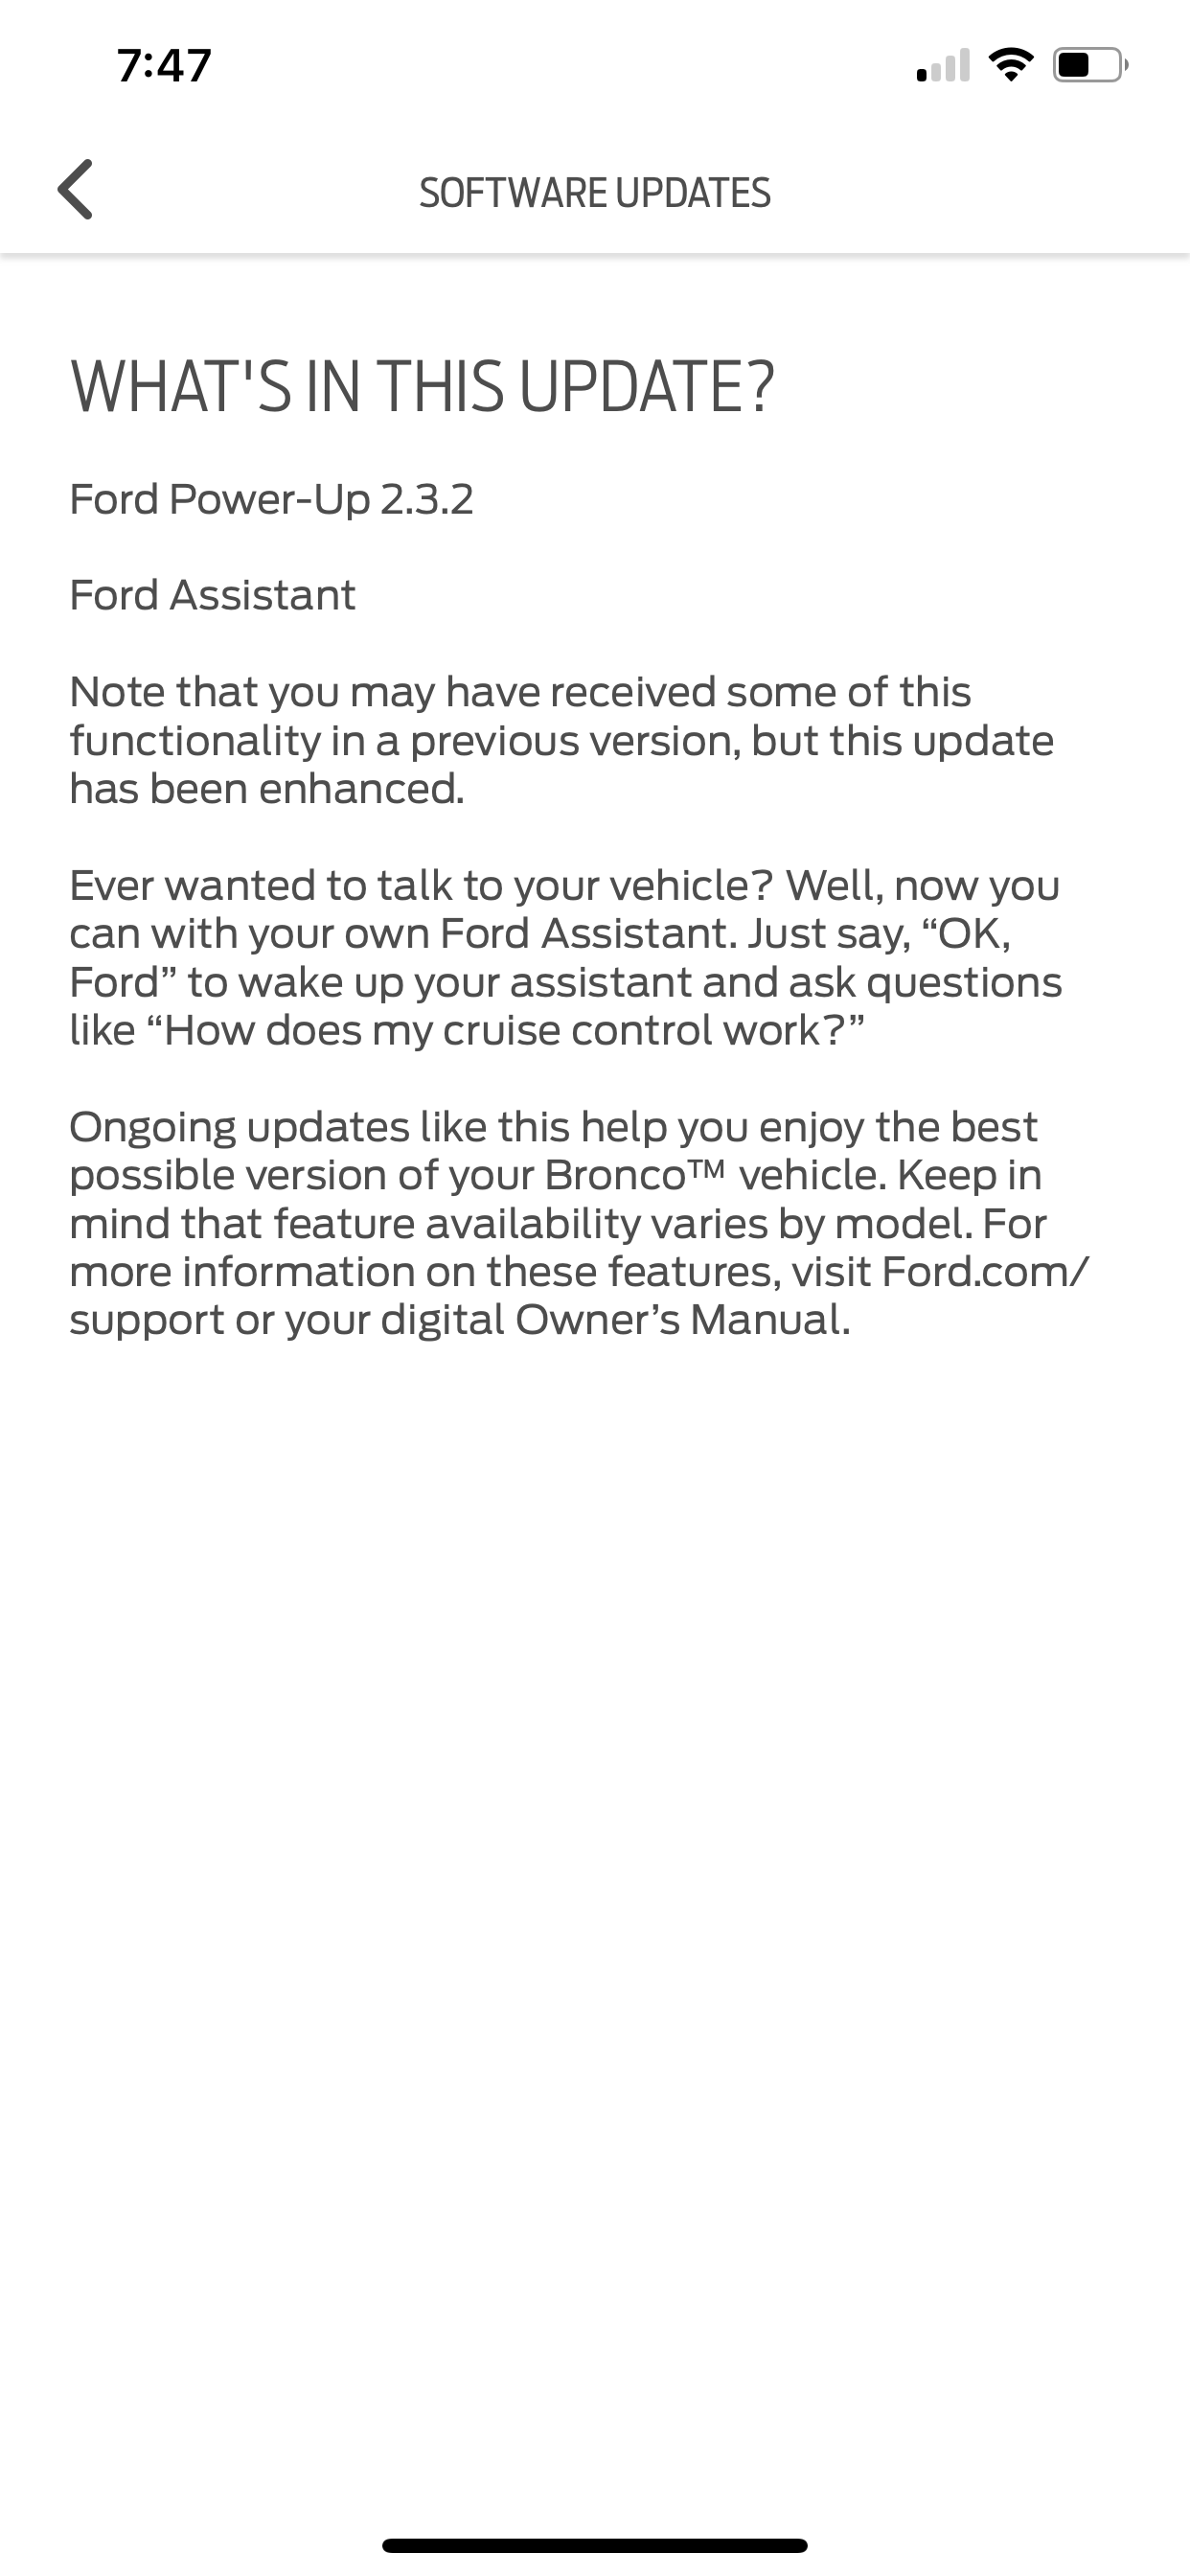 Ford Bronco How to never miss a OTA software update! [Instructions] DAFDE697-1242-4080-B133-608B59637A61